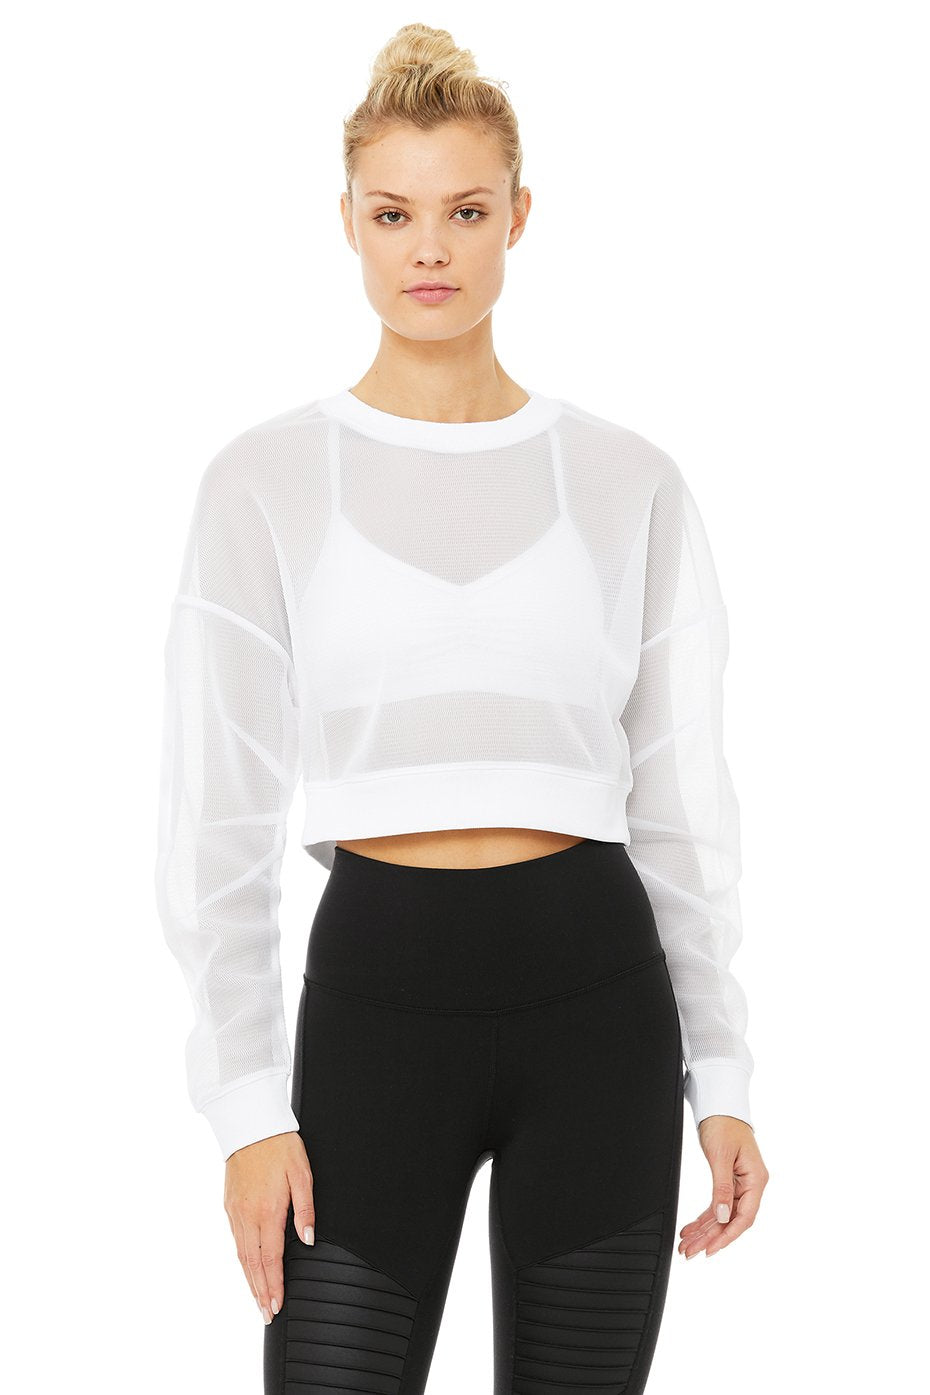 Row Long Sleeve Top in White by Alo Yoga - Work Well Daily